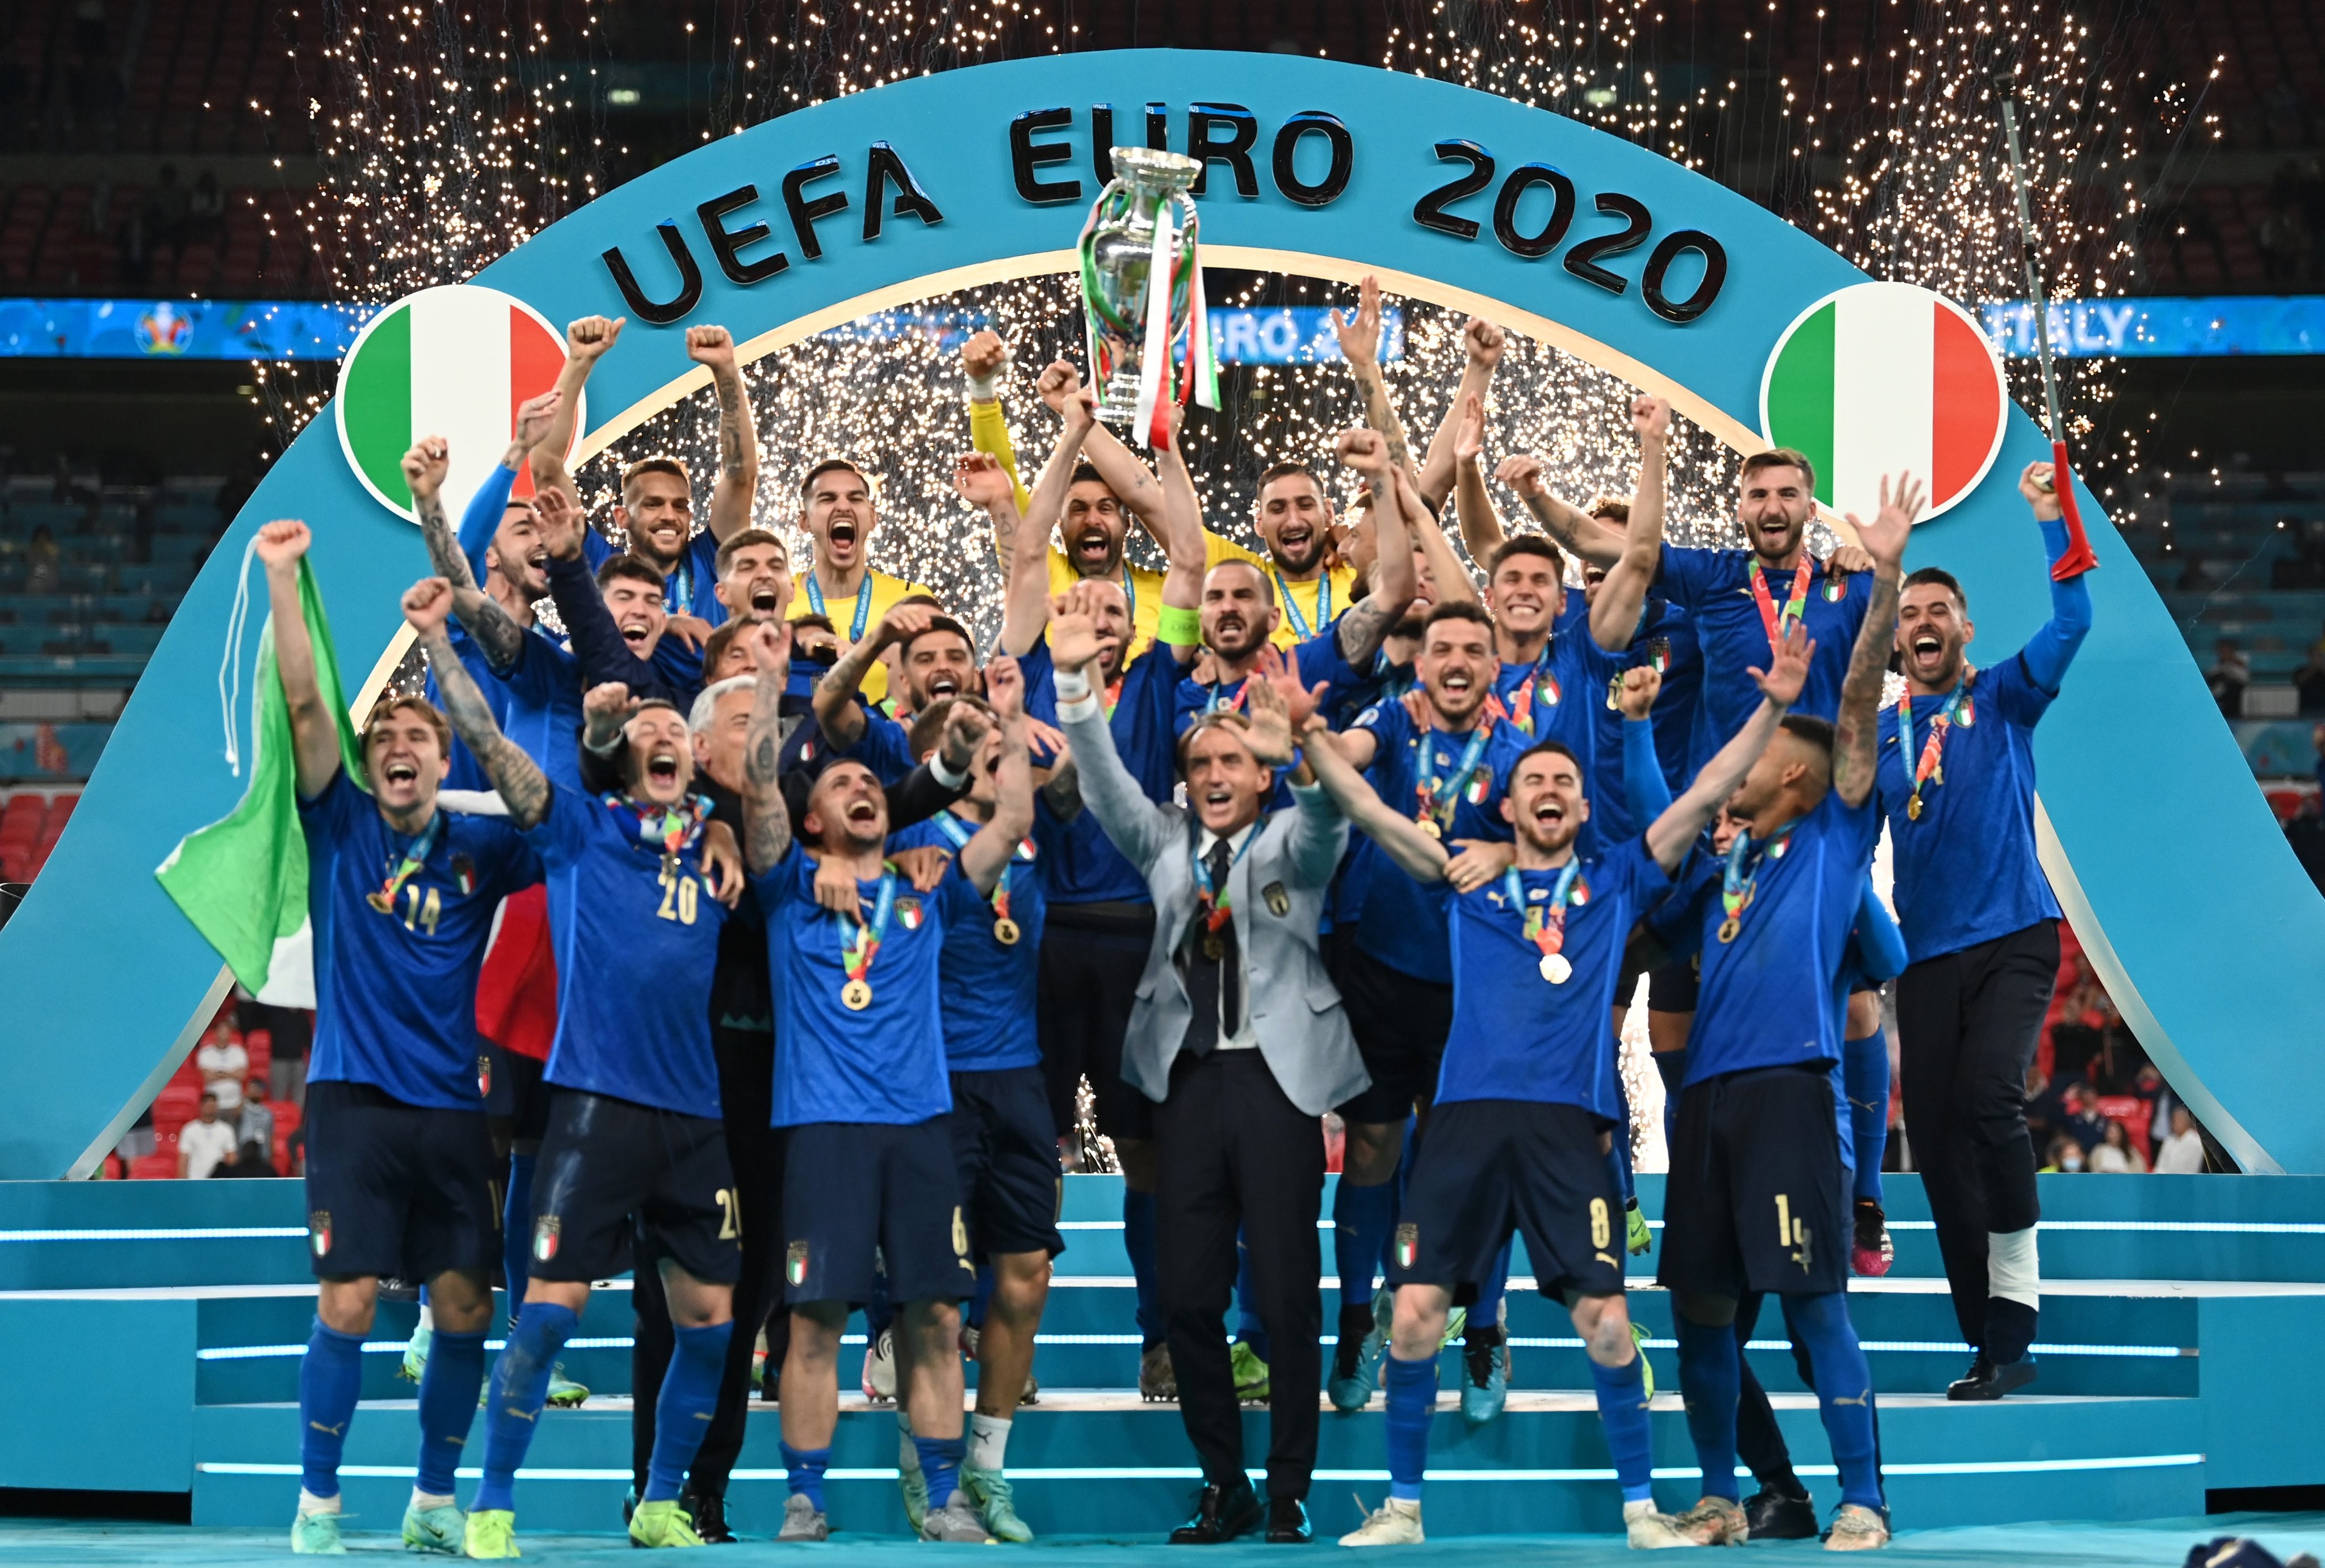 ITALY win Europe's biggest competition 'Euro Cup 2020'